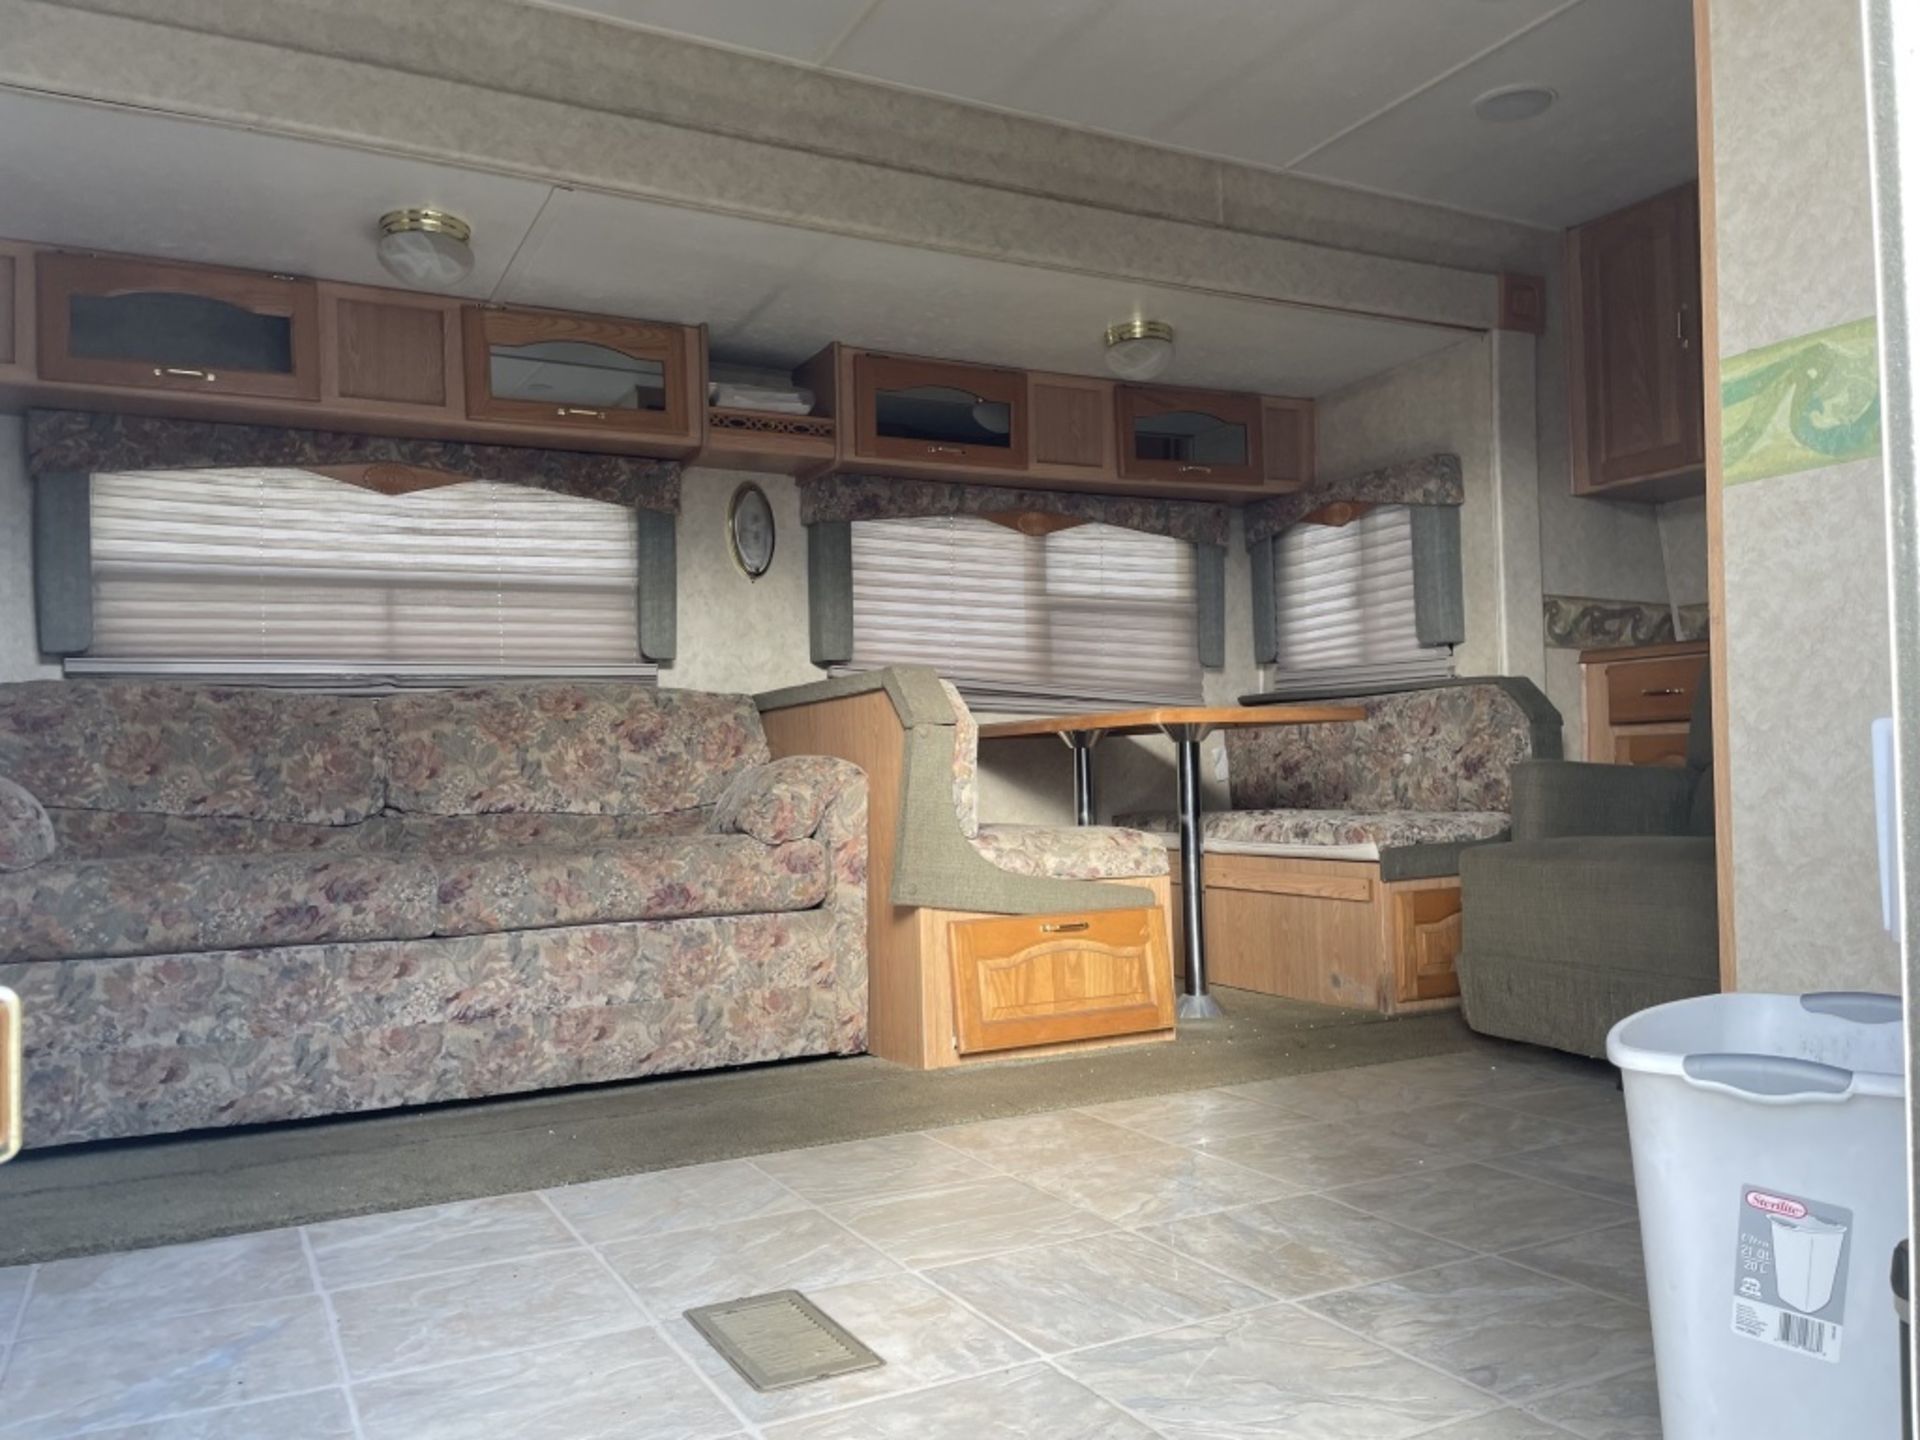 2005 Forest River Cardinal T/A RV Trailer - Image 18 of 33